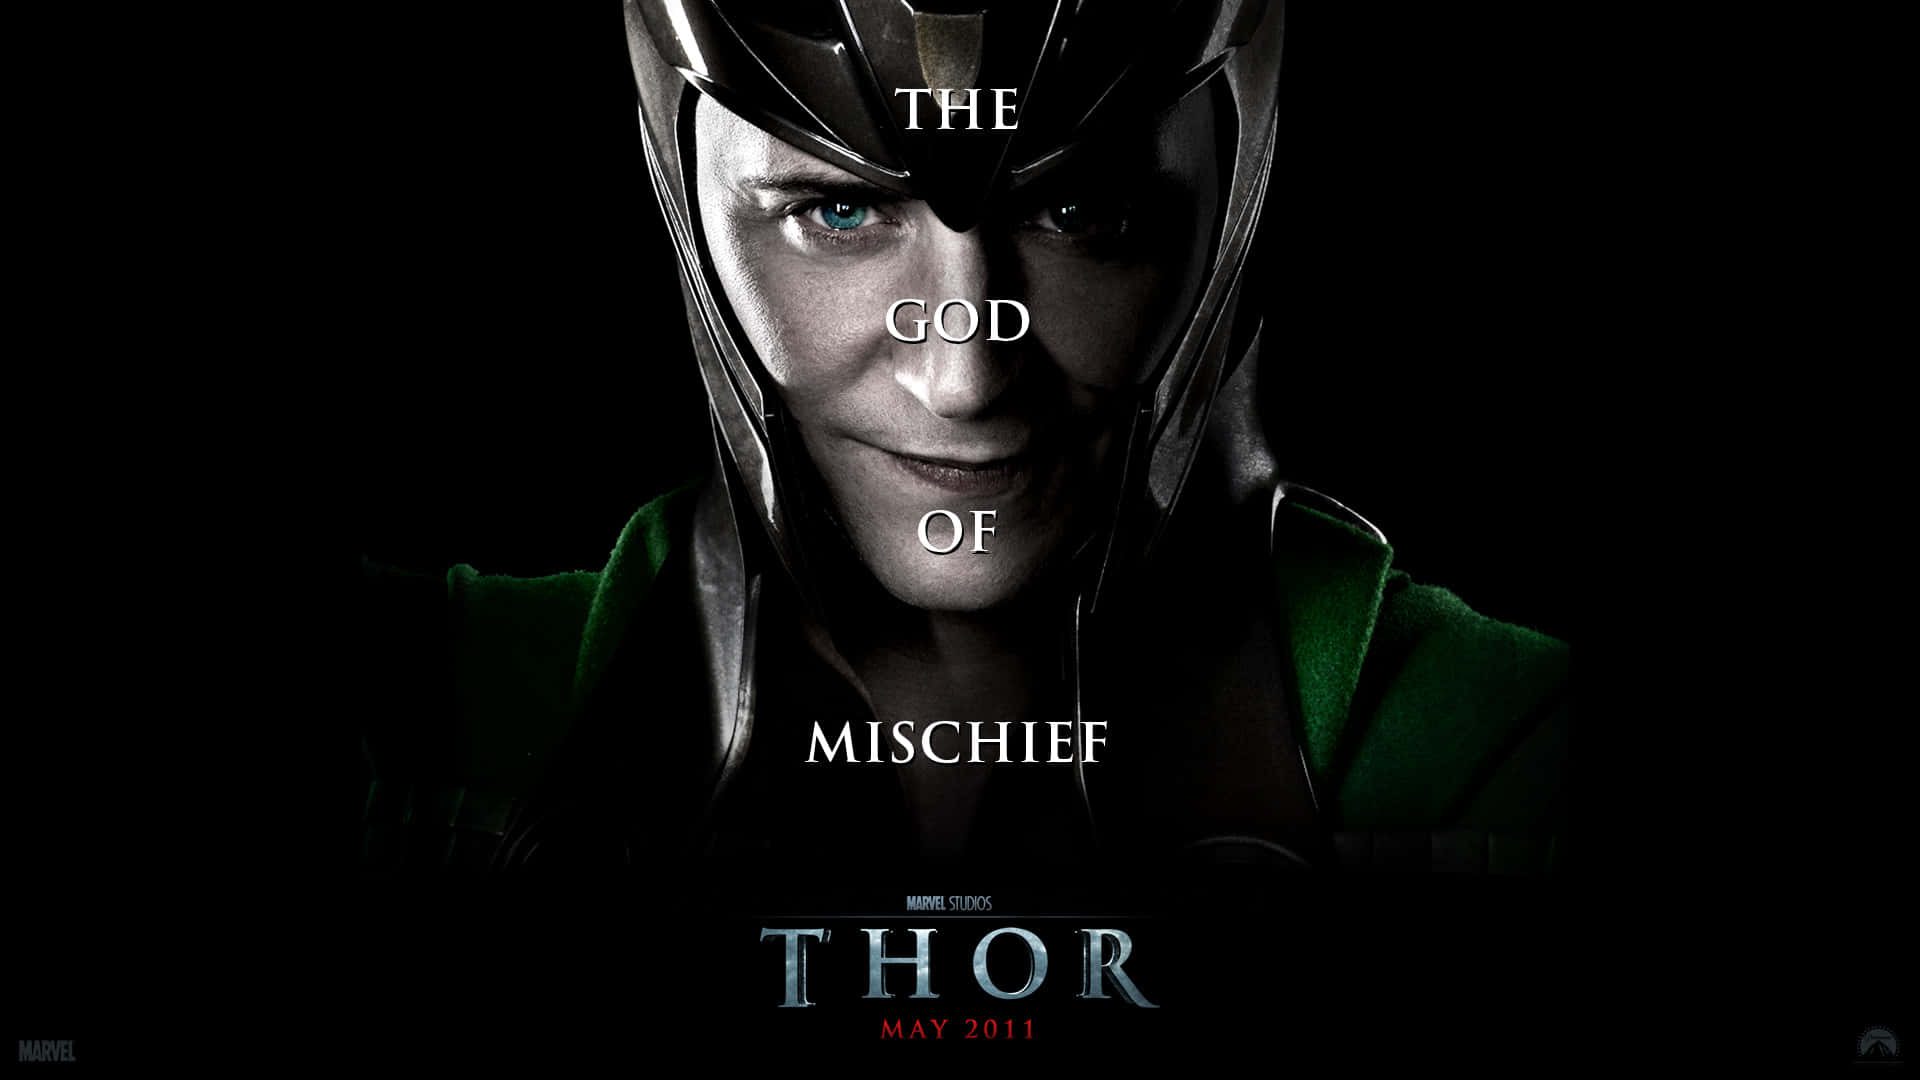 “Expect the unexpected in this captivating story of Loki.”